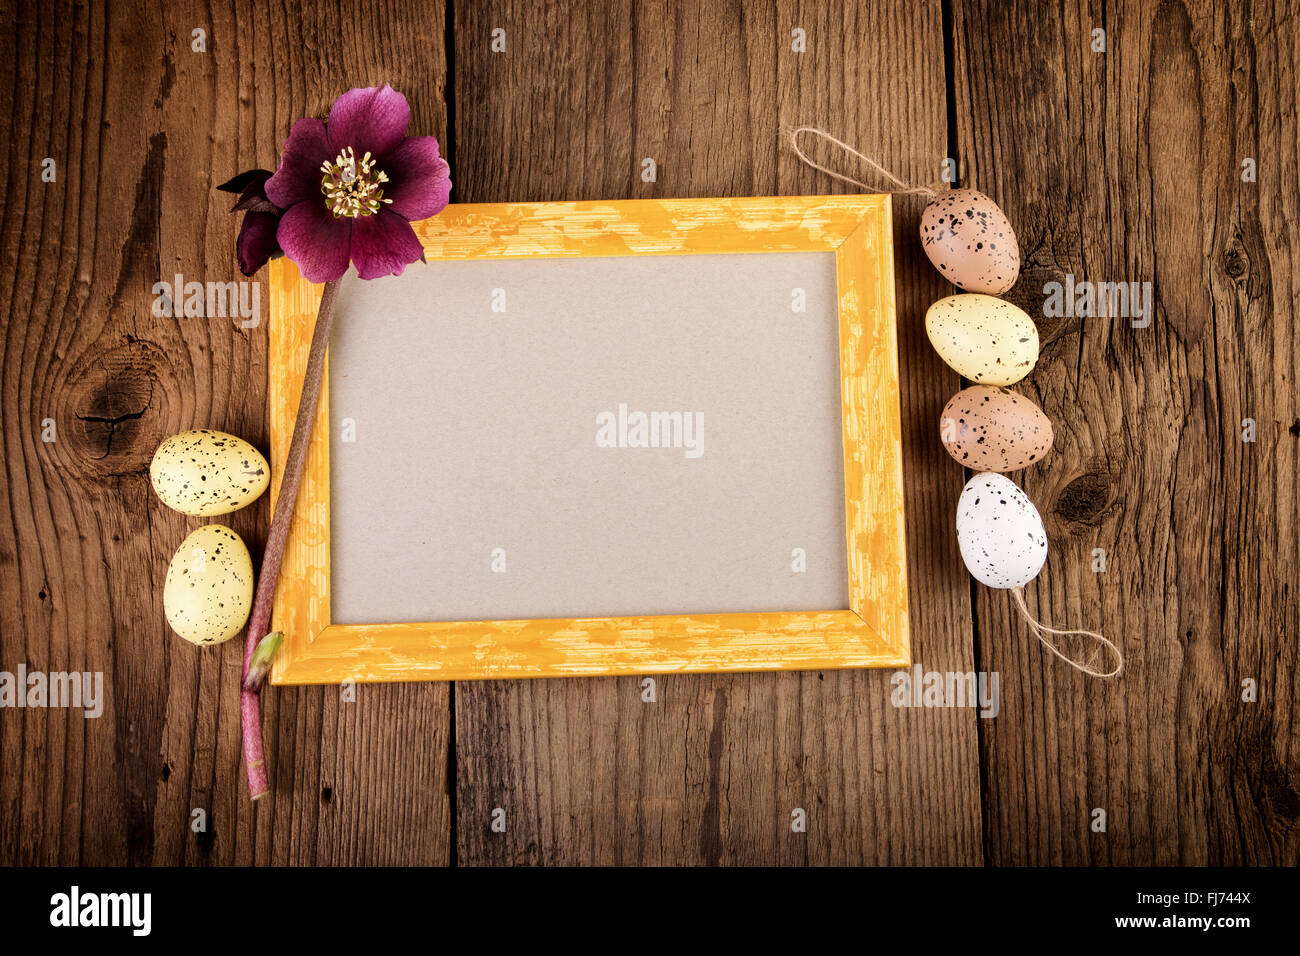 Easter greeting card with yellow picture frame on old wooden board. Top view with copy space. Stock Photo